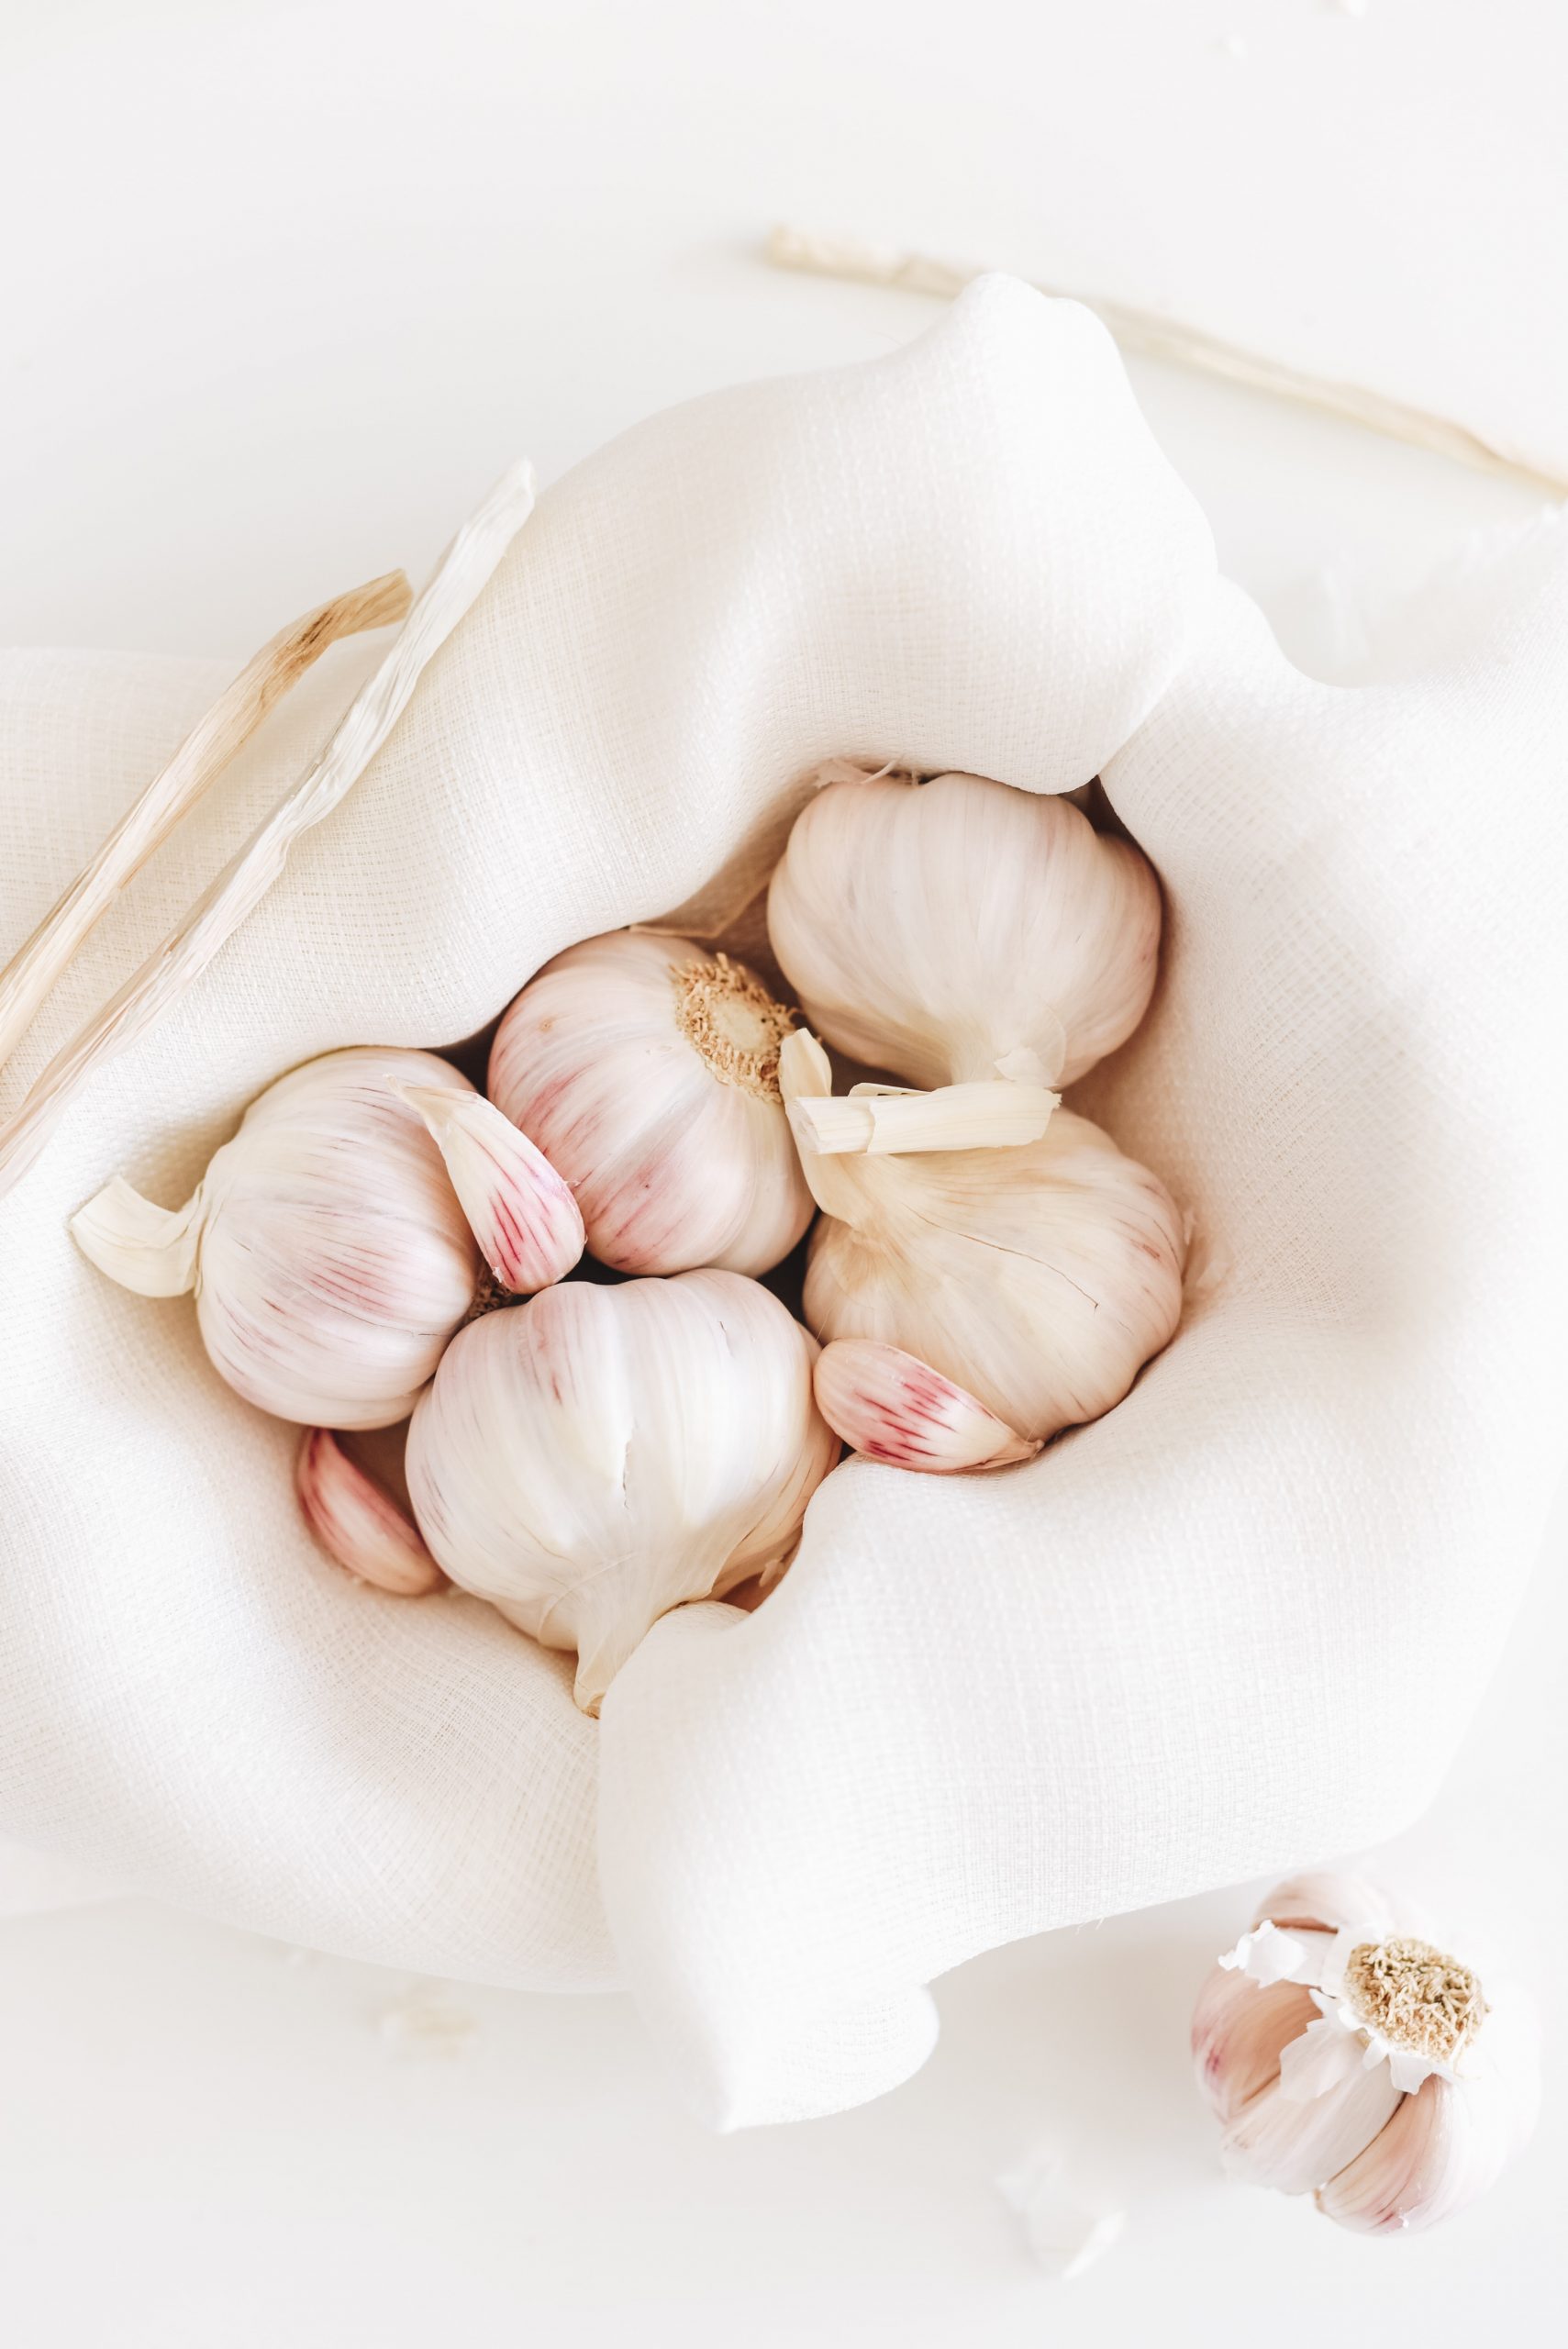 What Is A Garlic Clove? How To Use It, Grow It And Store It